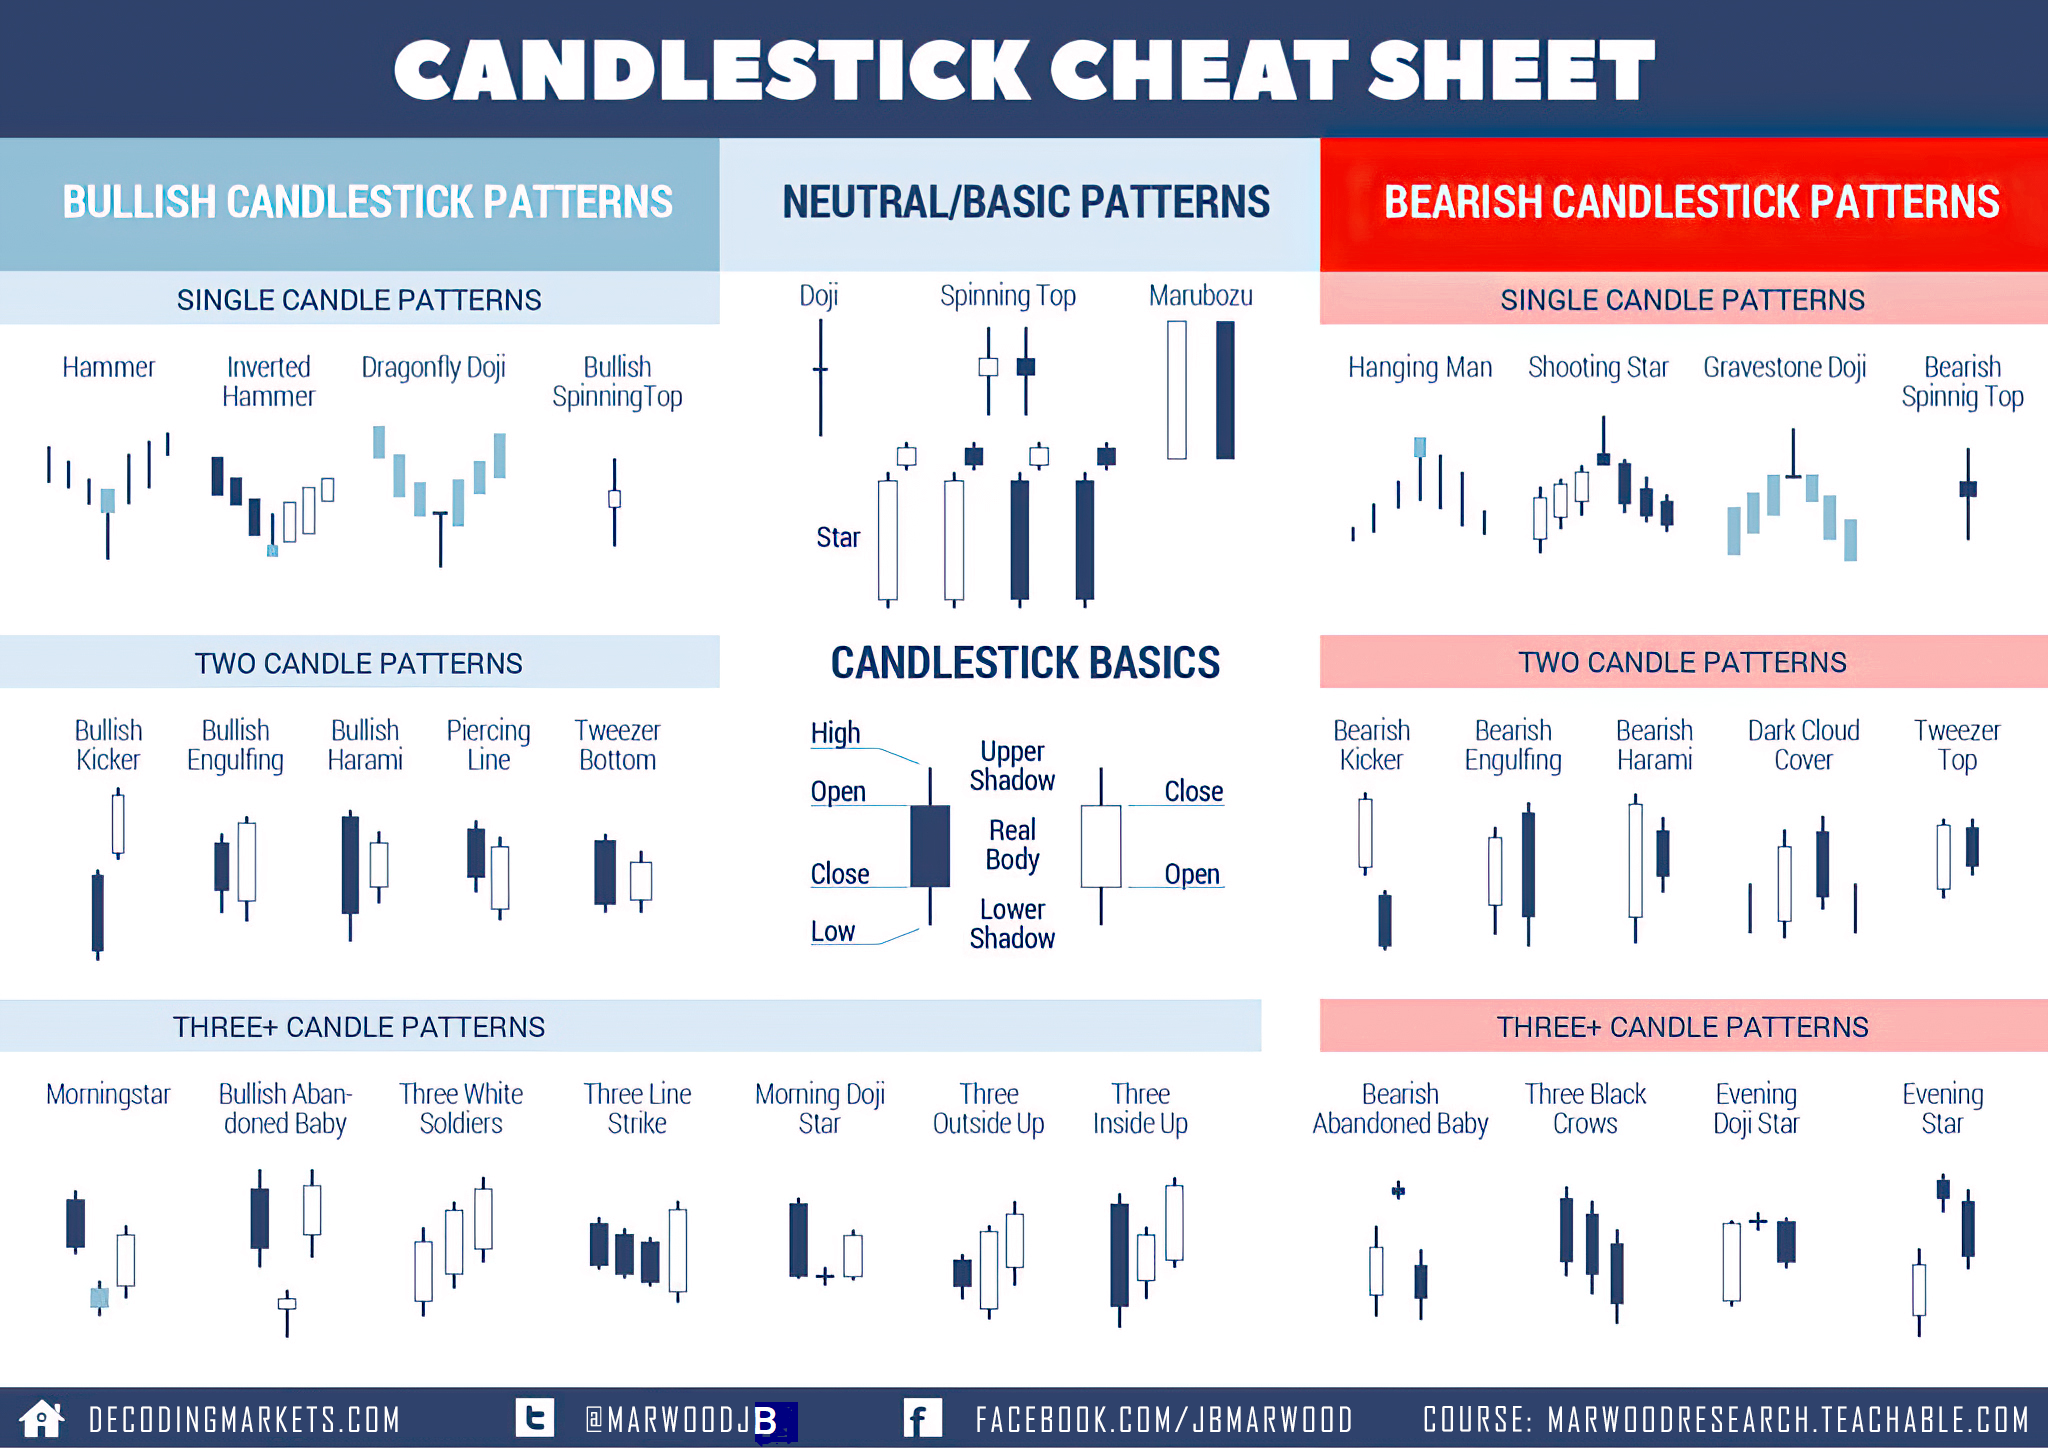 Candlestick forex cheat sheet when is the forex vacation